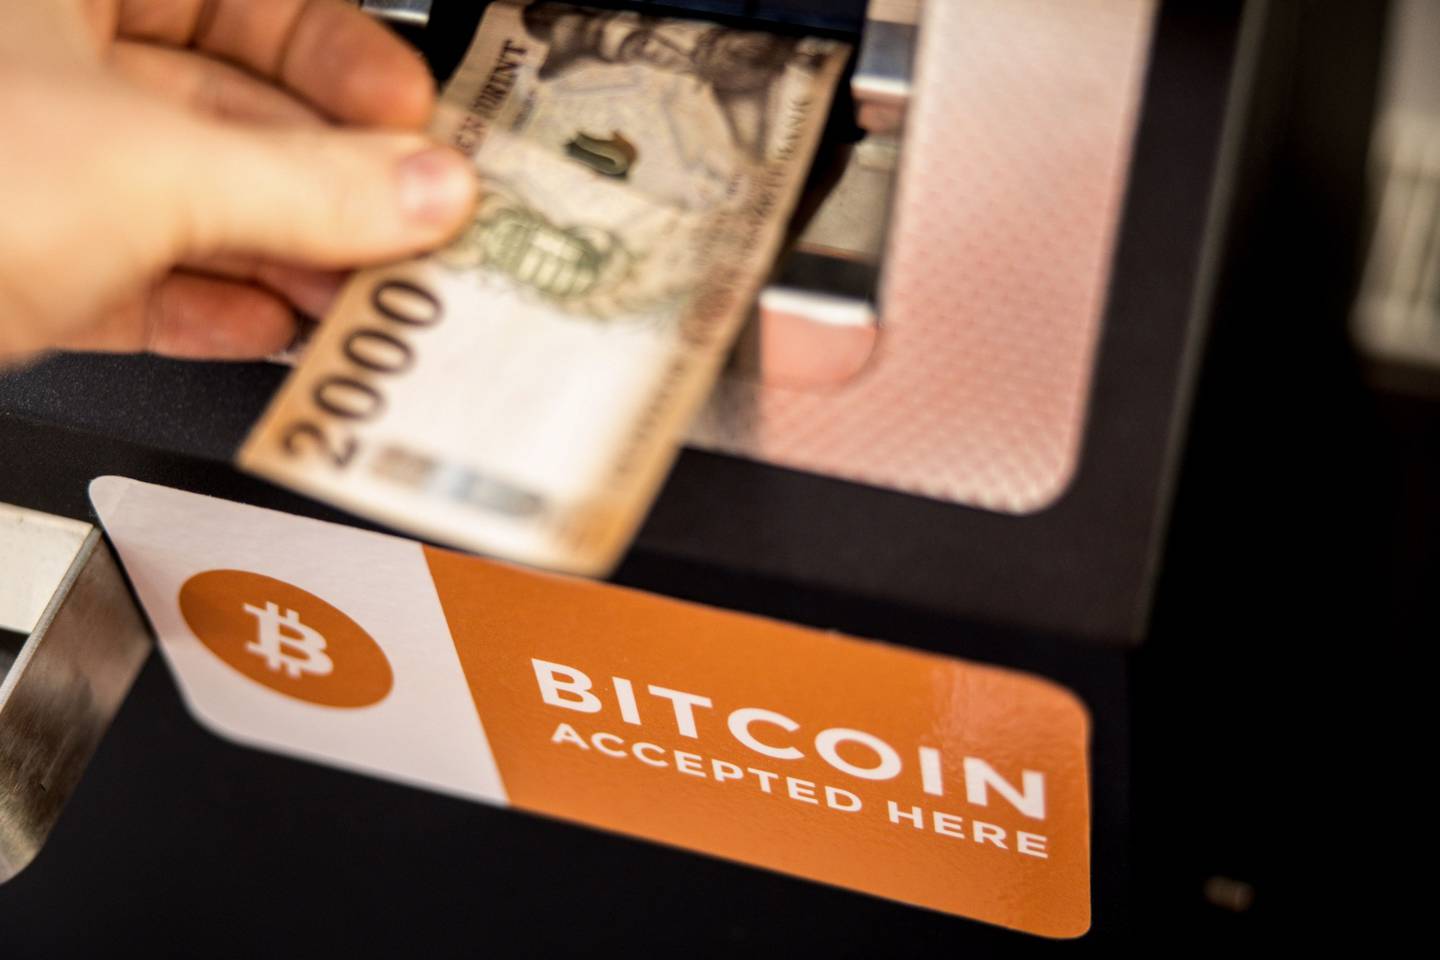 A customer deposits a Hungarian twenty thousand forint banknote into a cryptocurrency automated teller machine (ATM) in Budapest, Hungary, on Friday, Feb. 18, 2022. Bitcoin is testing $40,000, a key psychological level, as the U.S. plan talks with Russia about military intelligence that suggests an imminent Ukraine invasion, which it denies. Photographer: Akos Stiller/Bloomberg